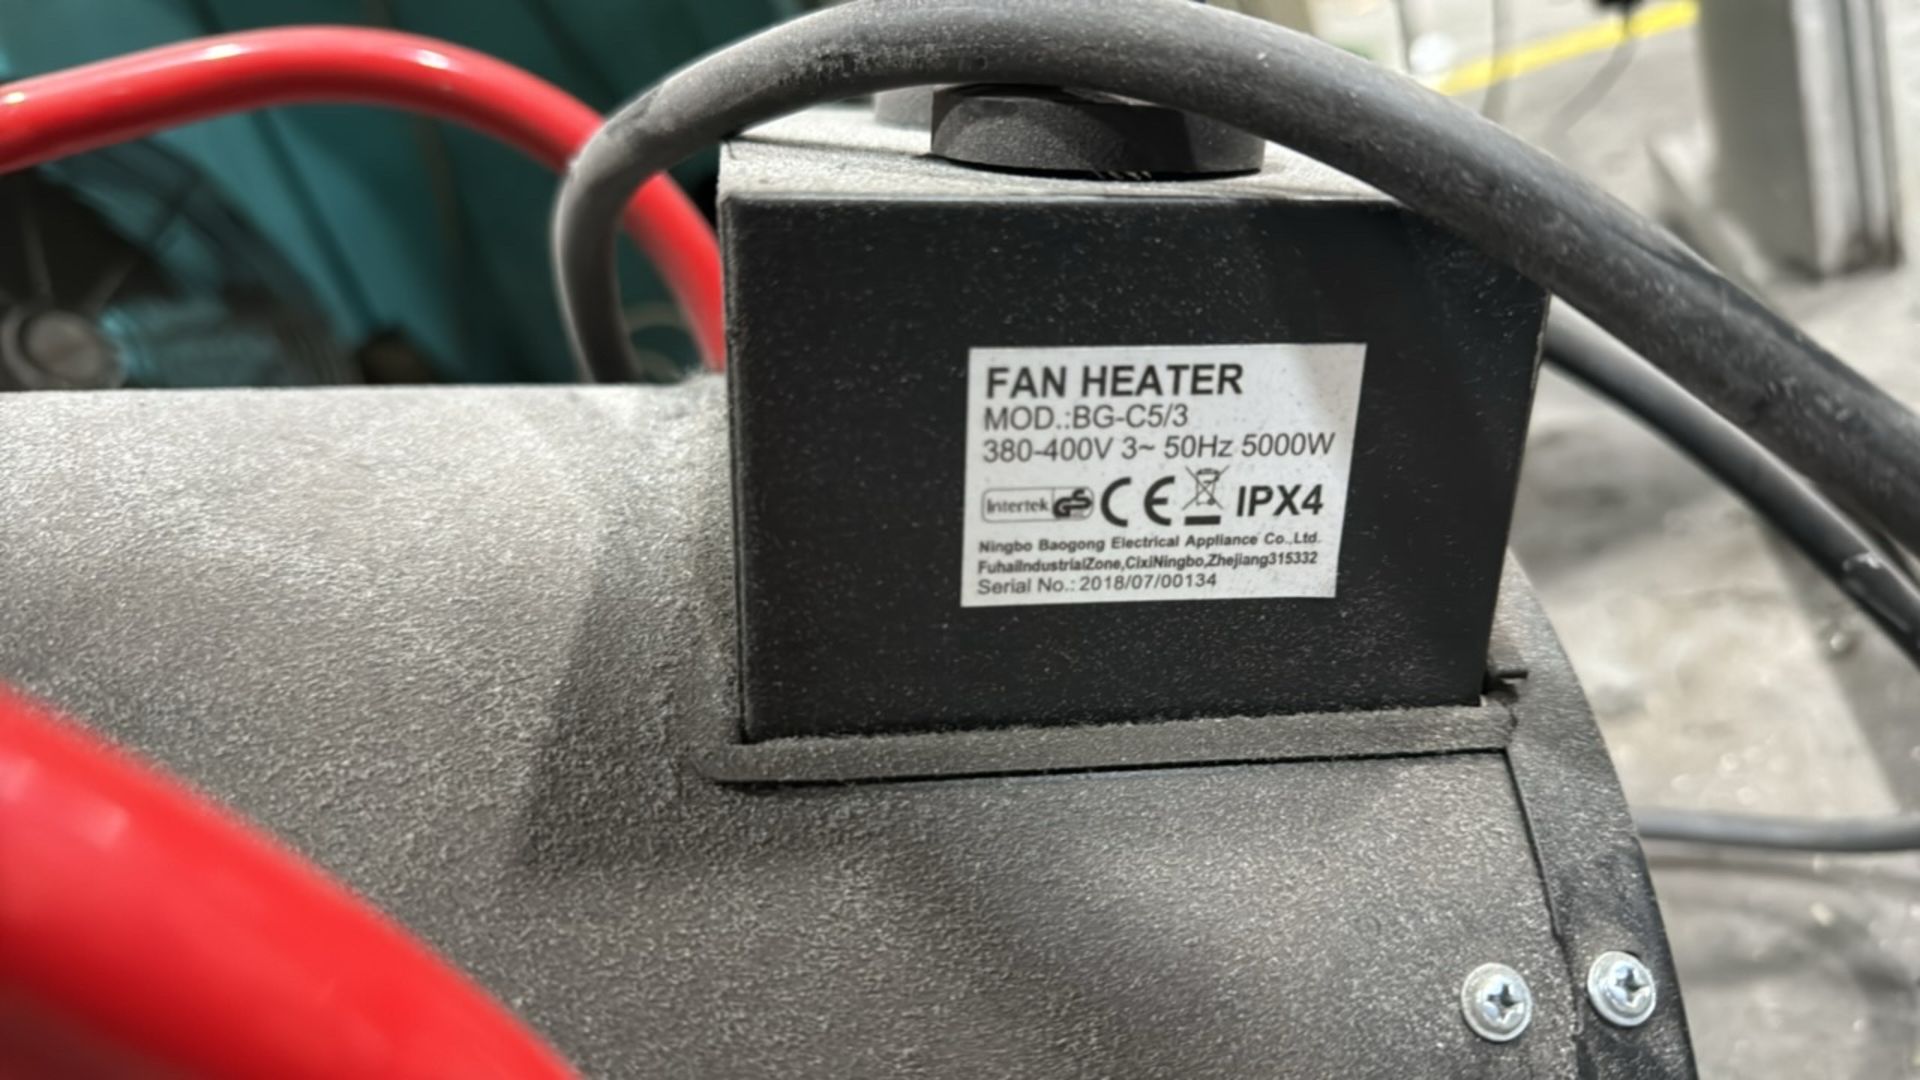 ref 595 - RS Pro Portable Heater - Image 4 of 4